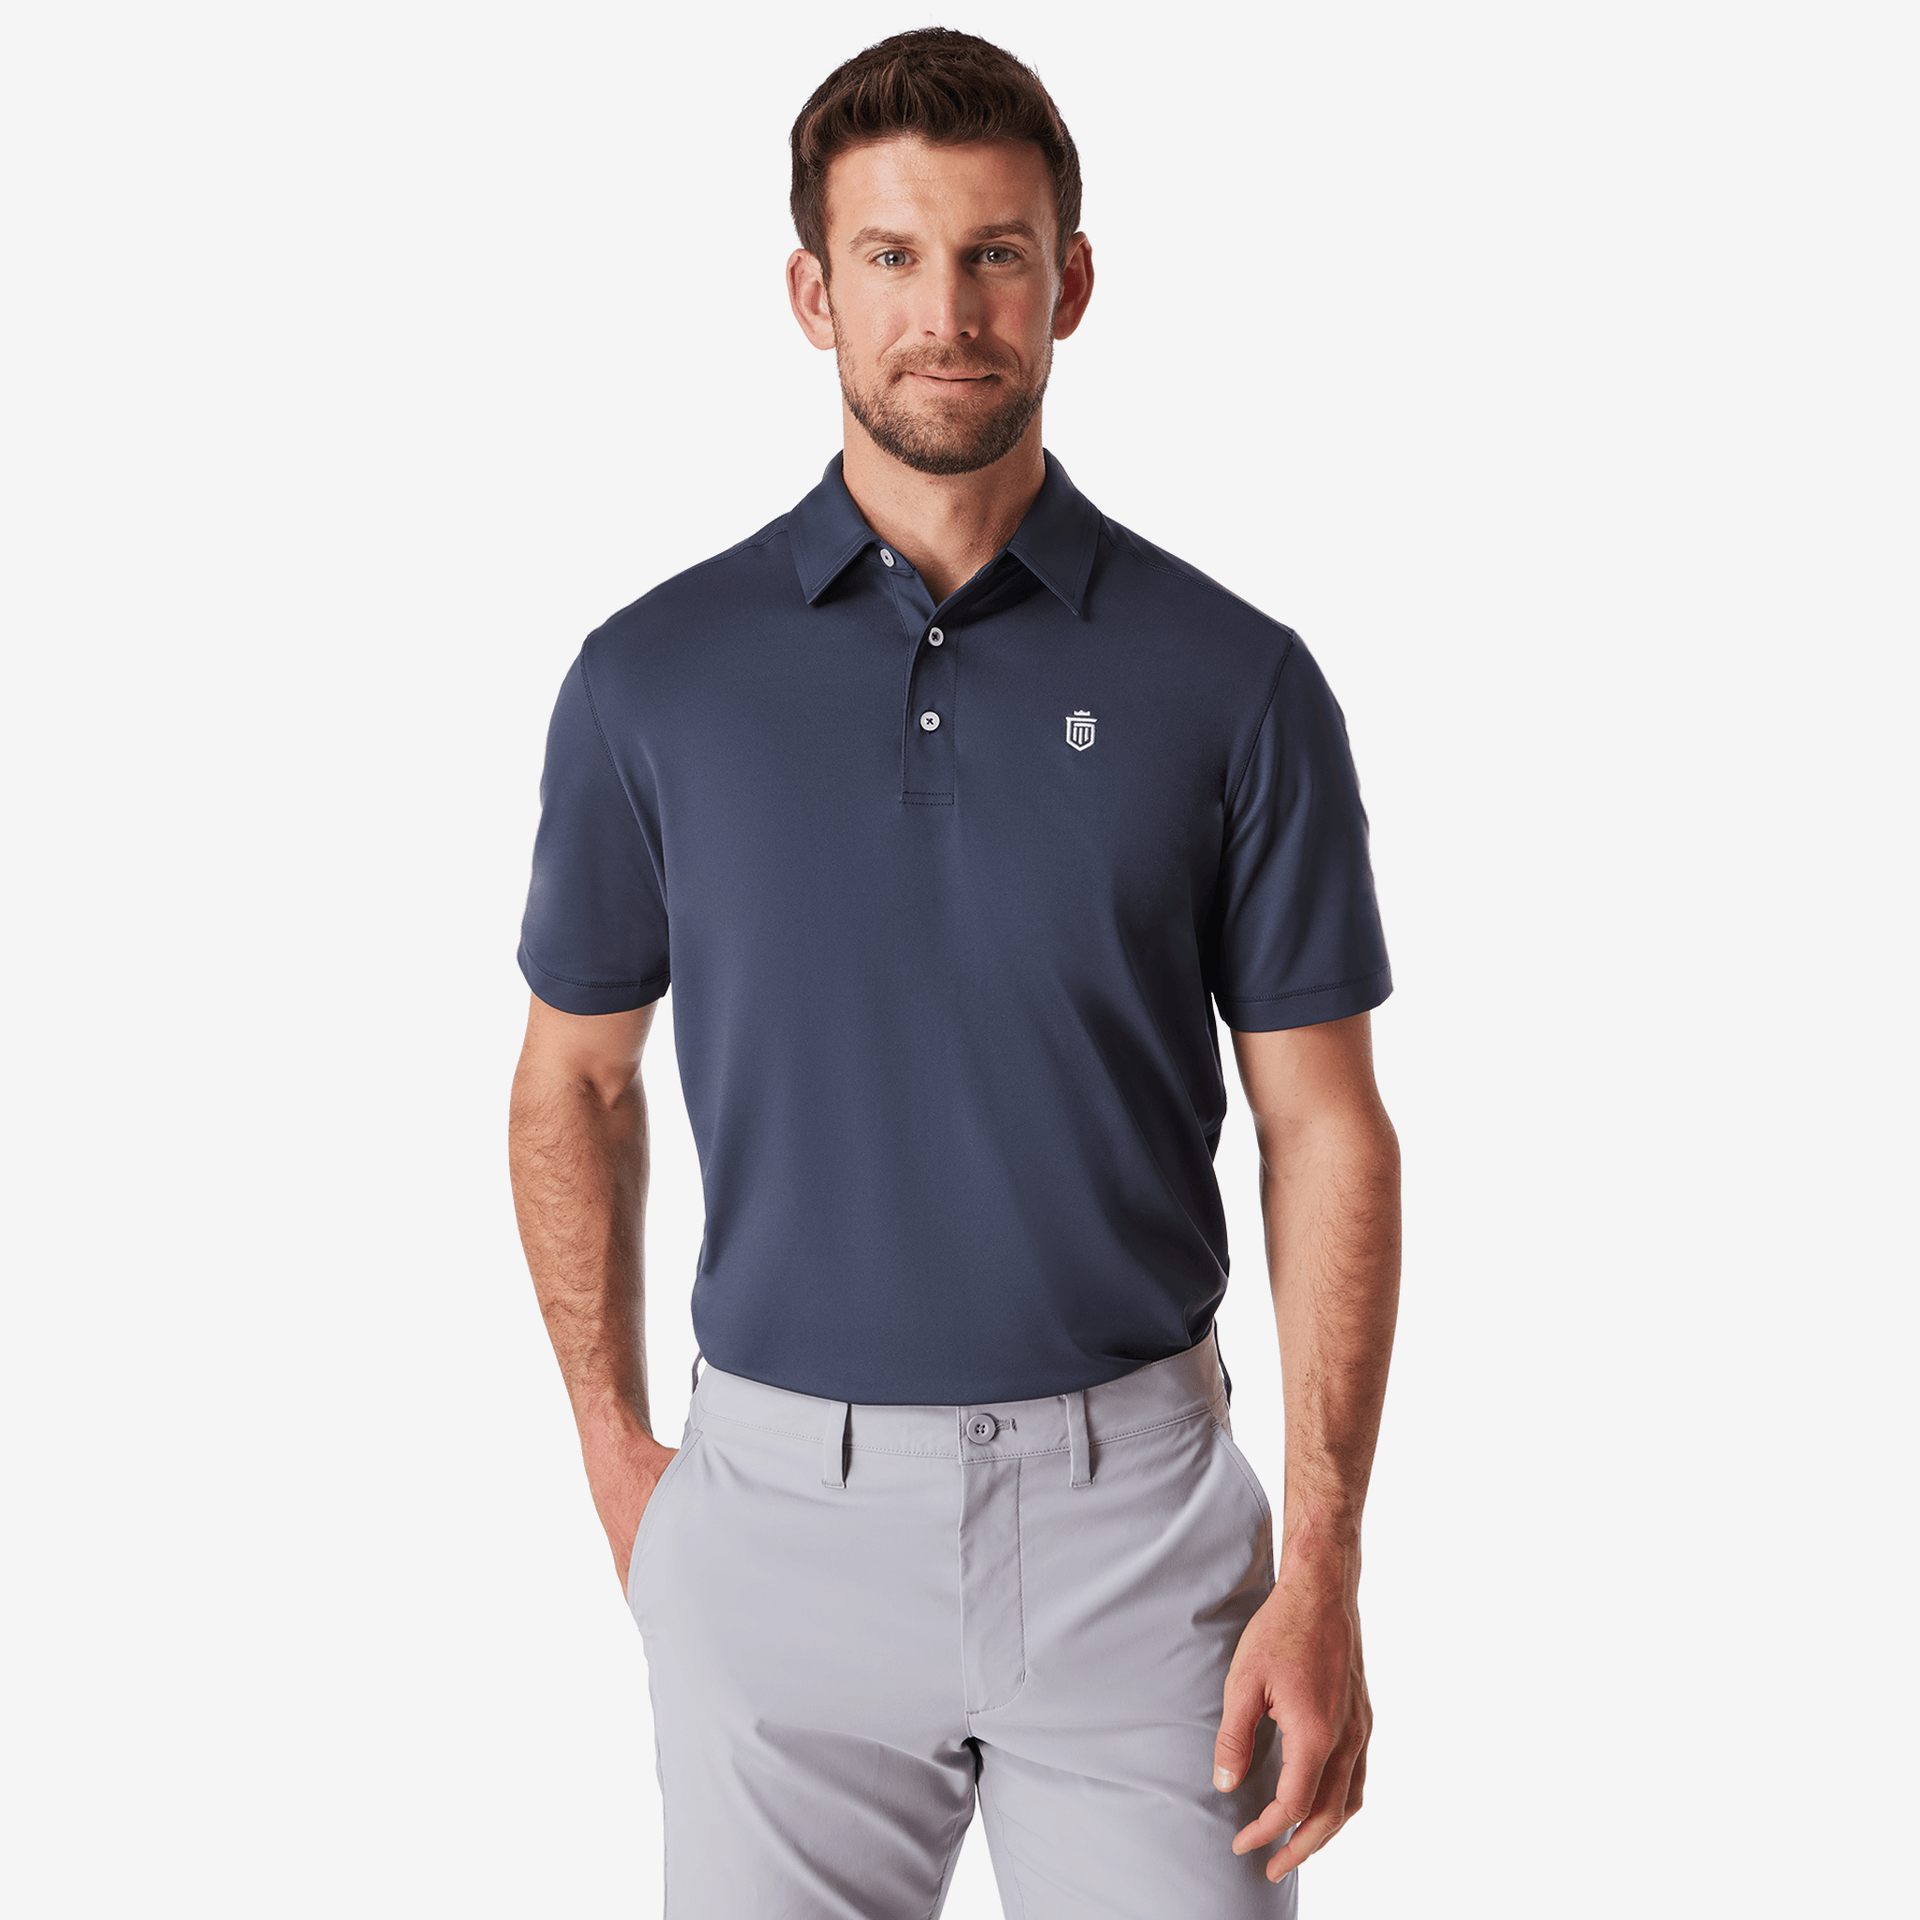 Nike The Athletic Department Men's Polo